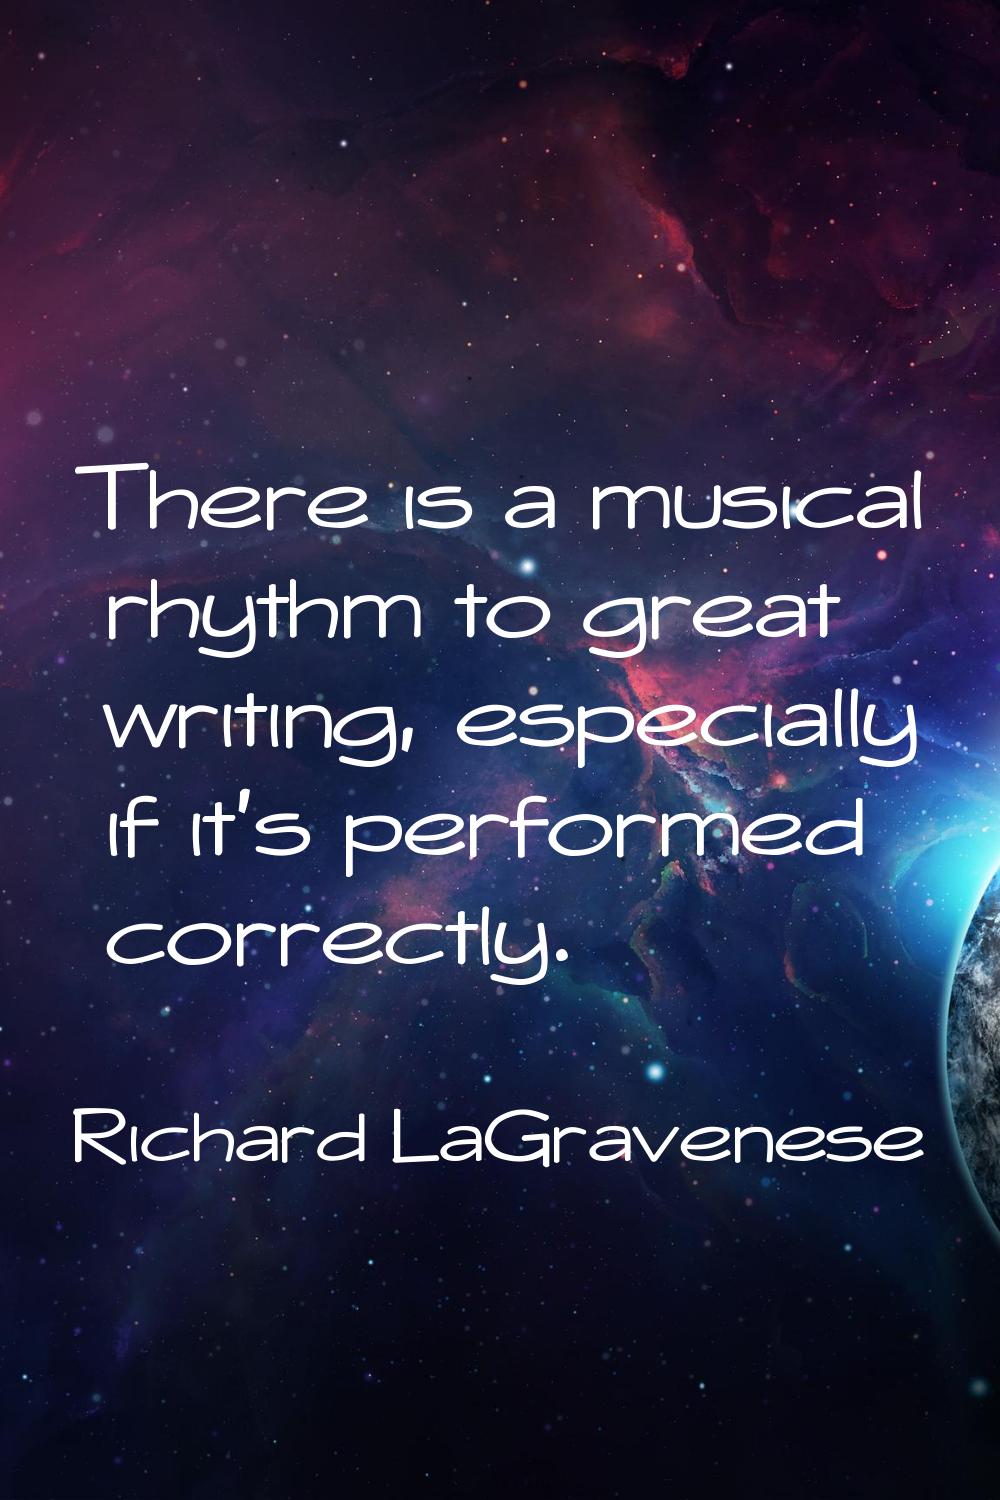 There is a musical rhythm to great writing, especially if it's performed correctly.